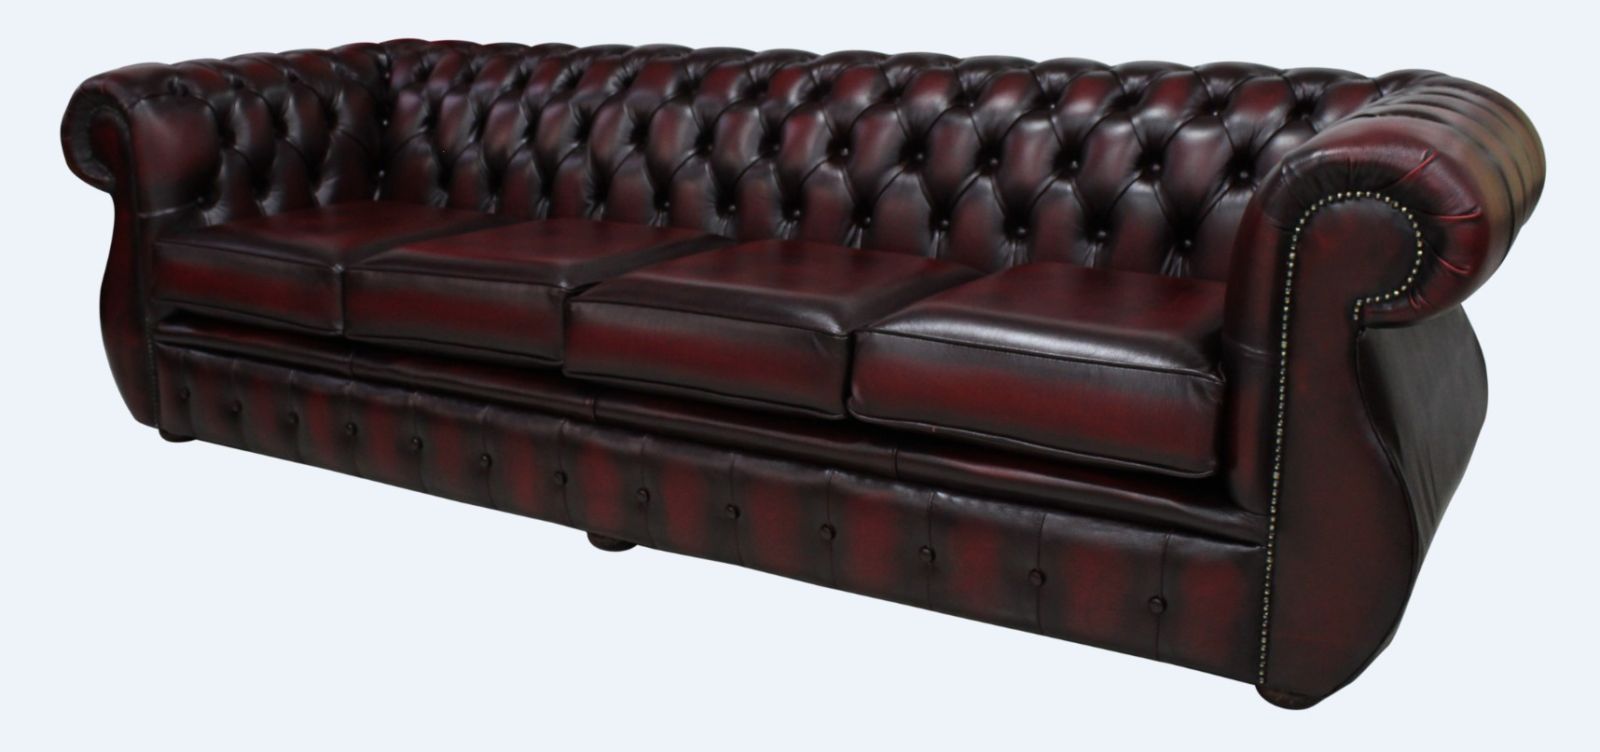 Product photograph of Chesterfield 4 Seater Antique Oxblood Red Leather Sofa In Kimberley Style from Chesterfield Sofas.